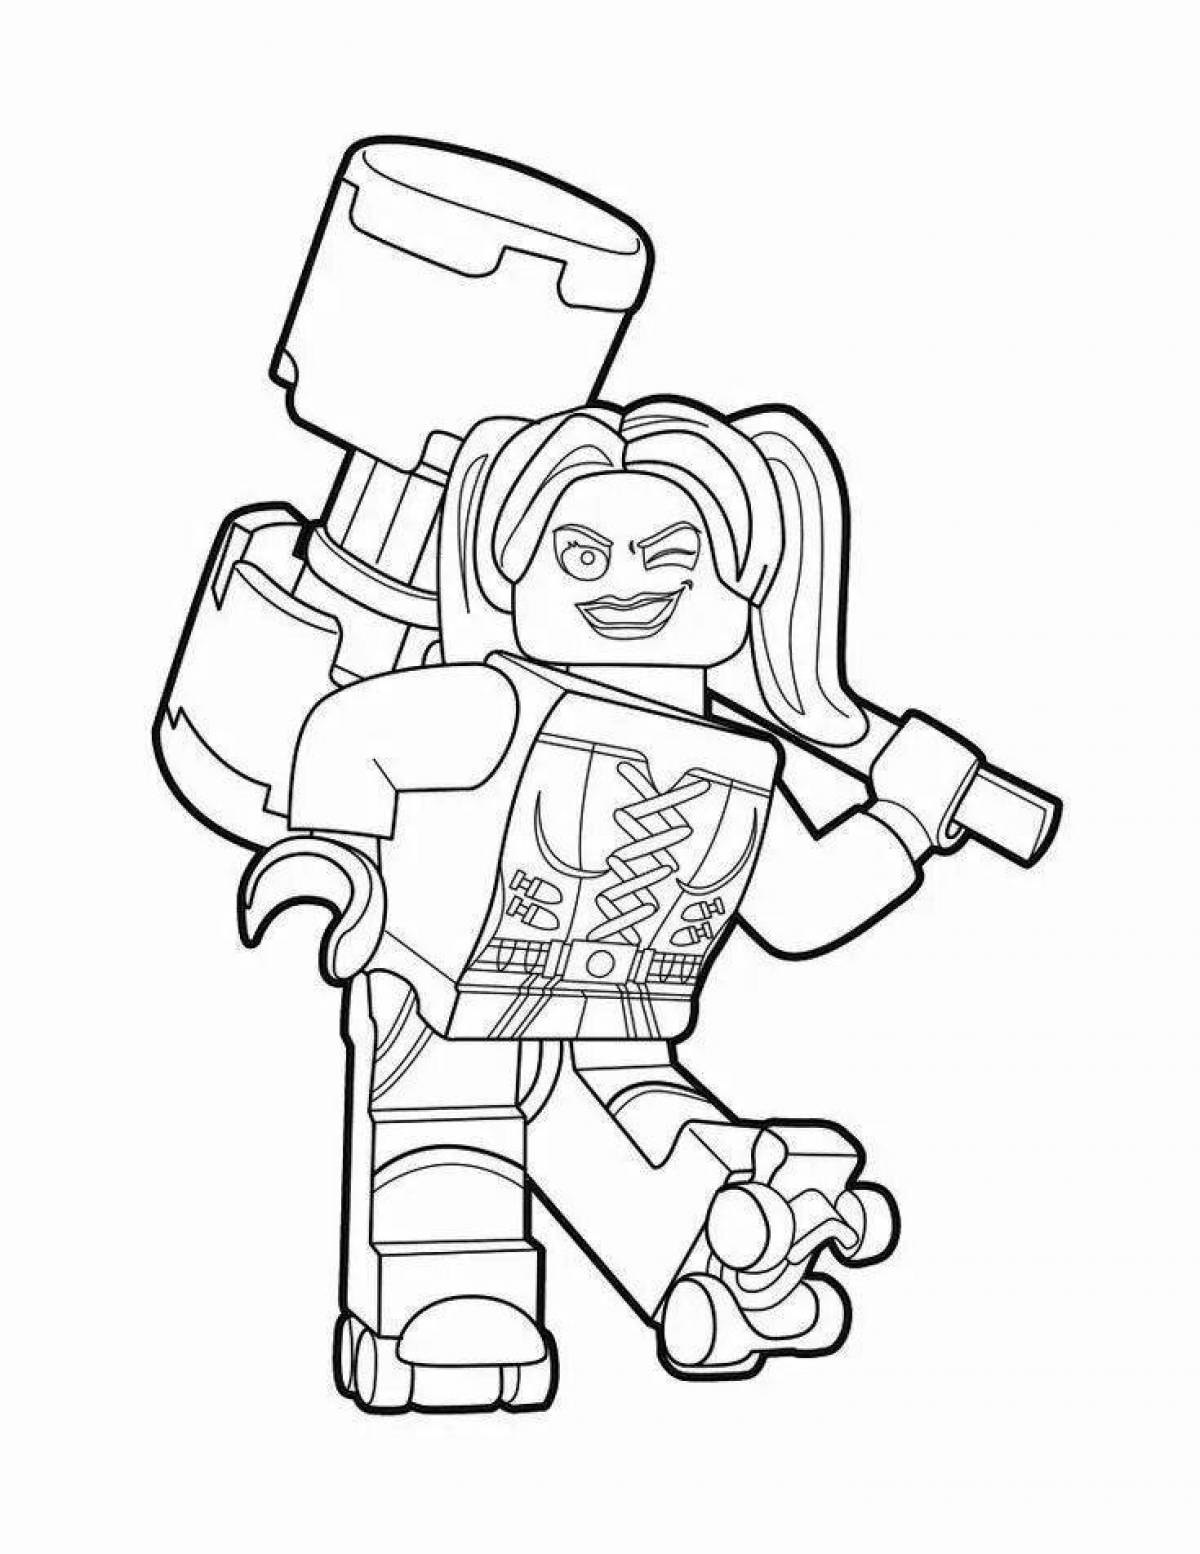 Awesome roblox quinn coloring page